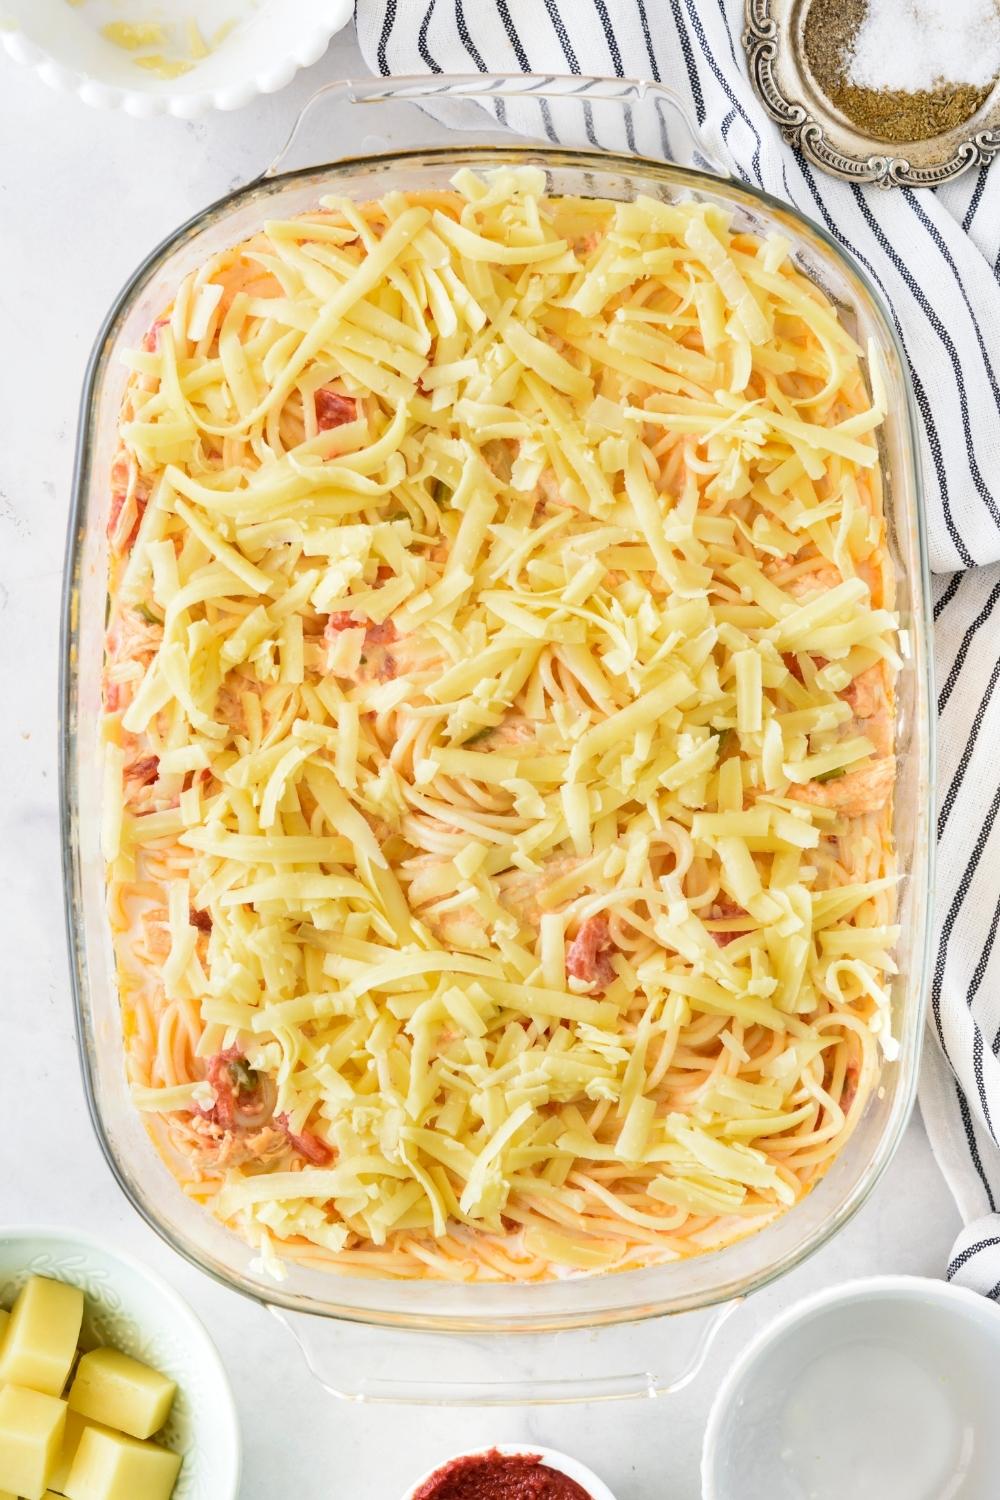 A casserole dish with unbaked casserole topped with shredded cheese.